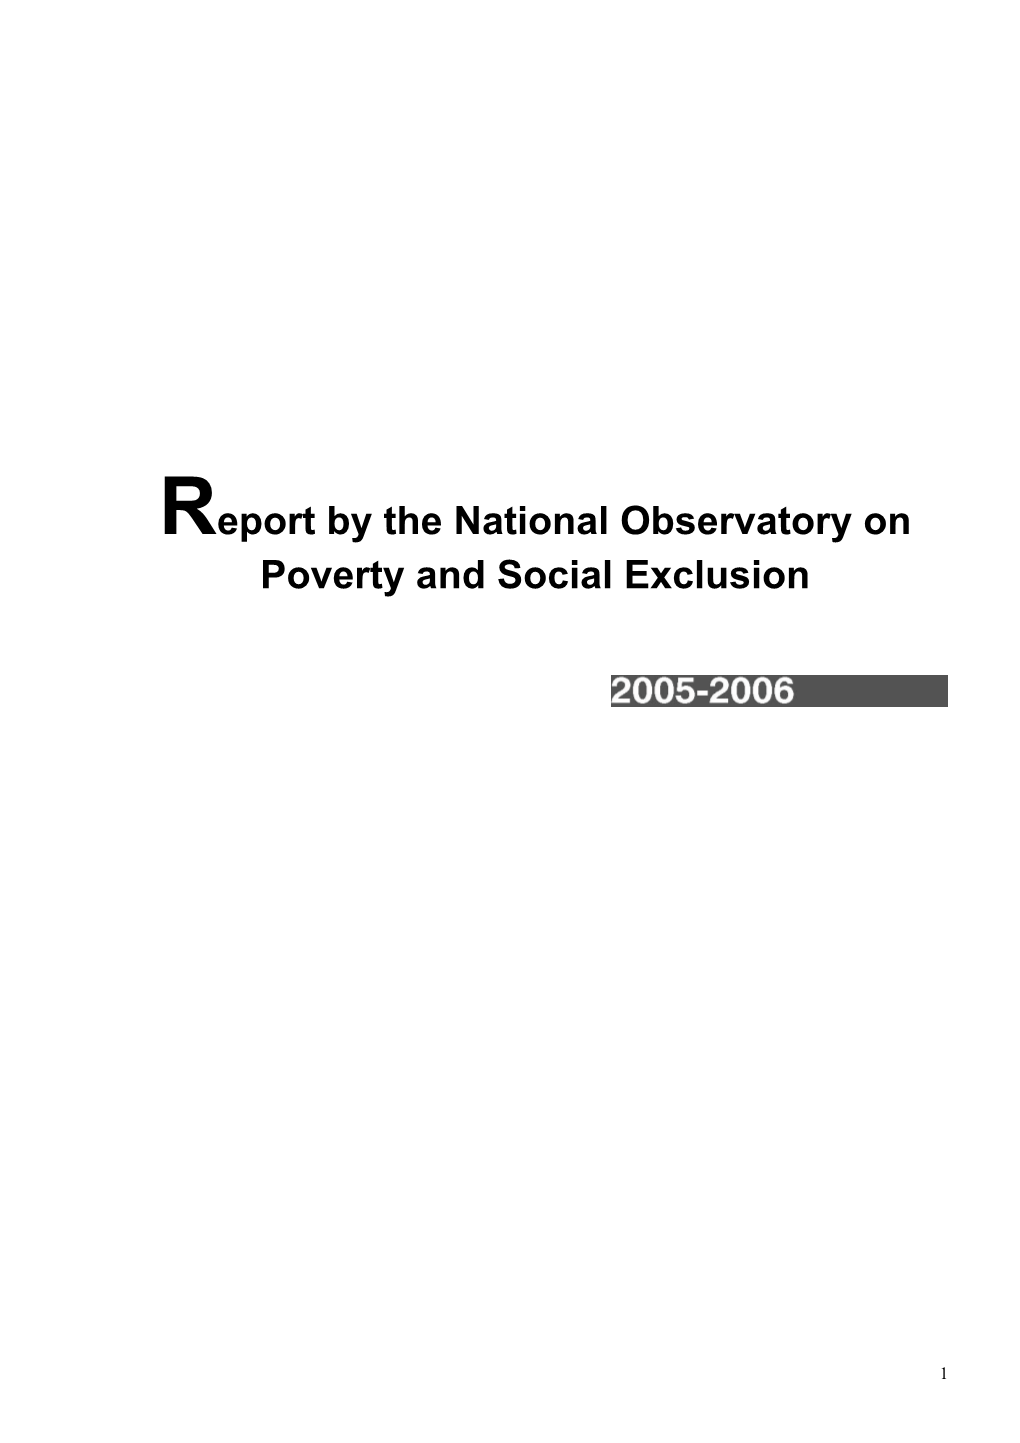 Report by the National Observatory on Poverty and Social Exclusion